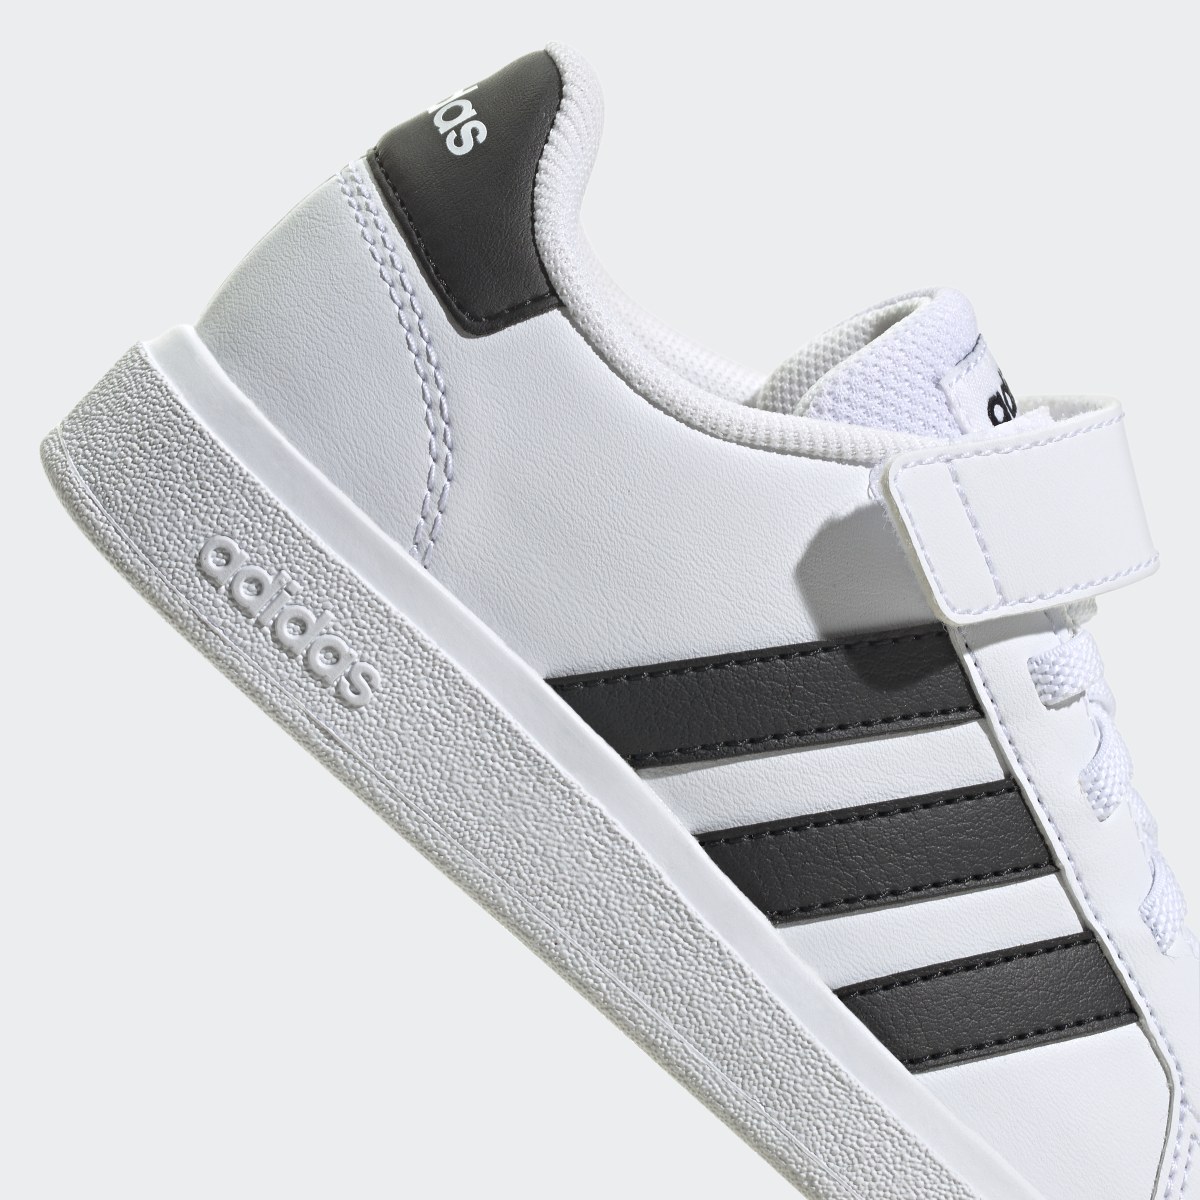 Adidas Grand Court Elastic Lace and Top Strap Shoes. 10